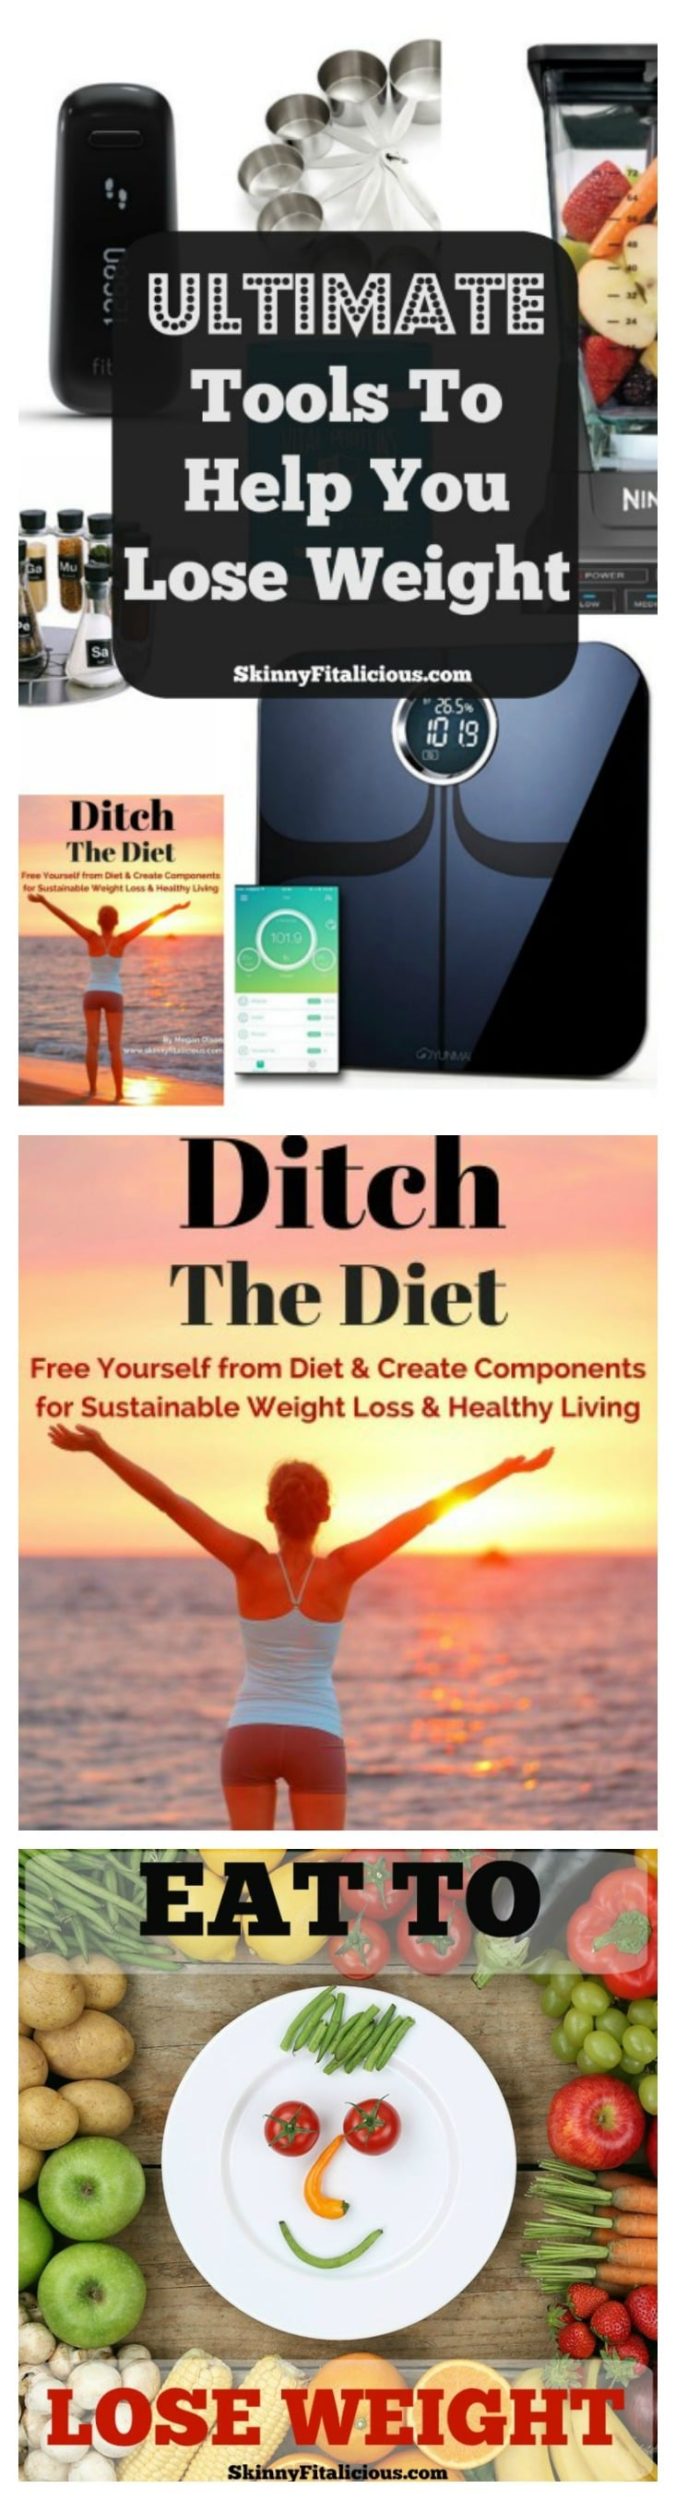 Readers, friends & women I help lose weight frequently ask for my recommendations on weight loss products. Today I'm sharing tools to help you lose weight.